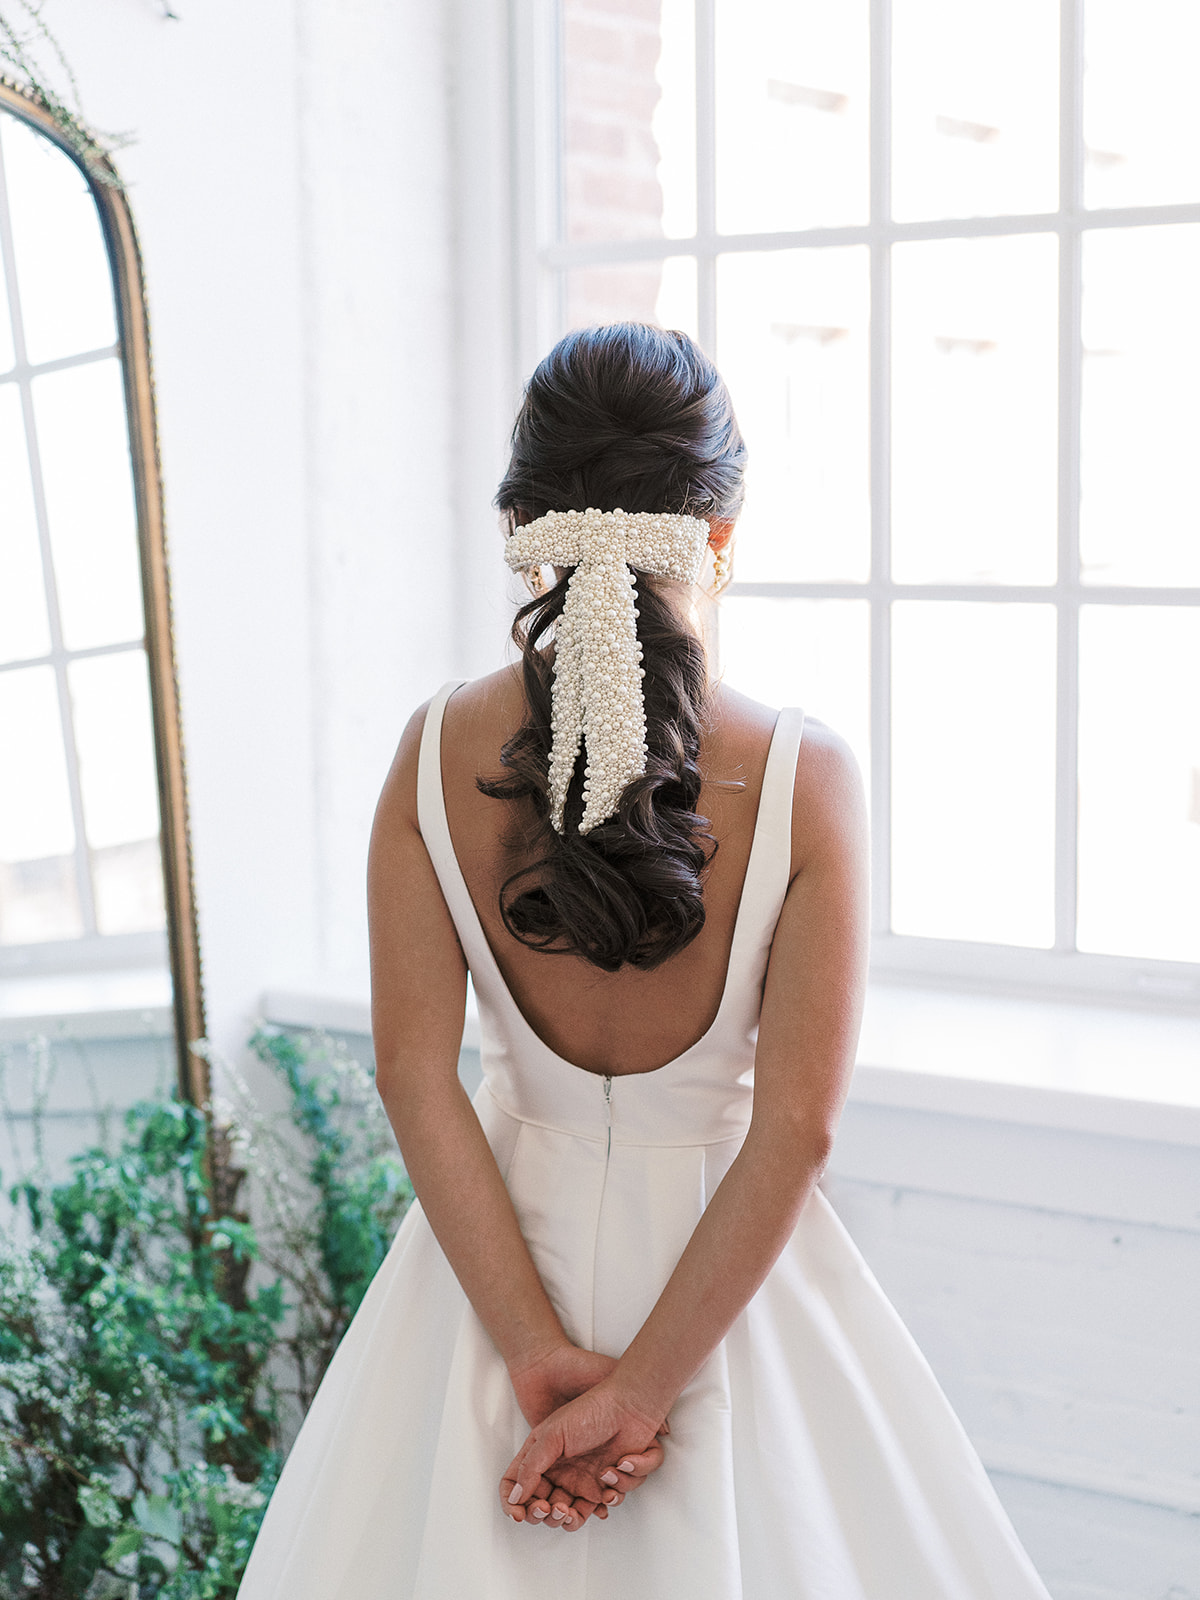 Intimate Wedding Hairstyles That Every Bride Must Surely Consider